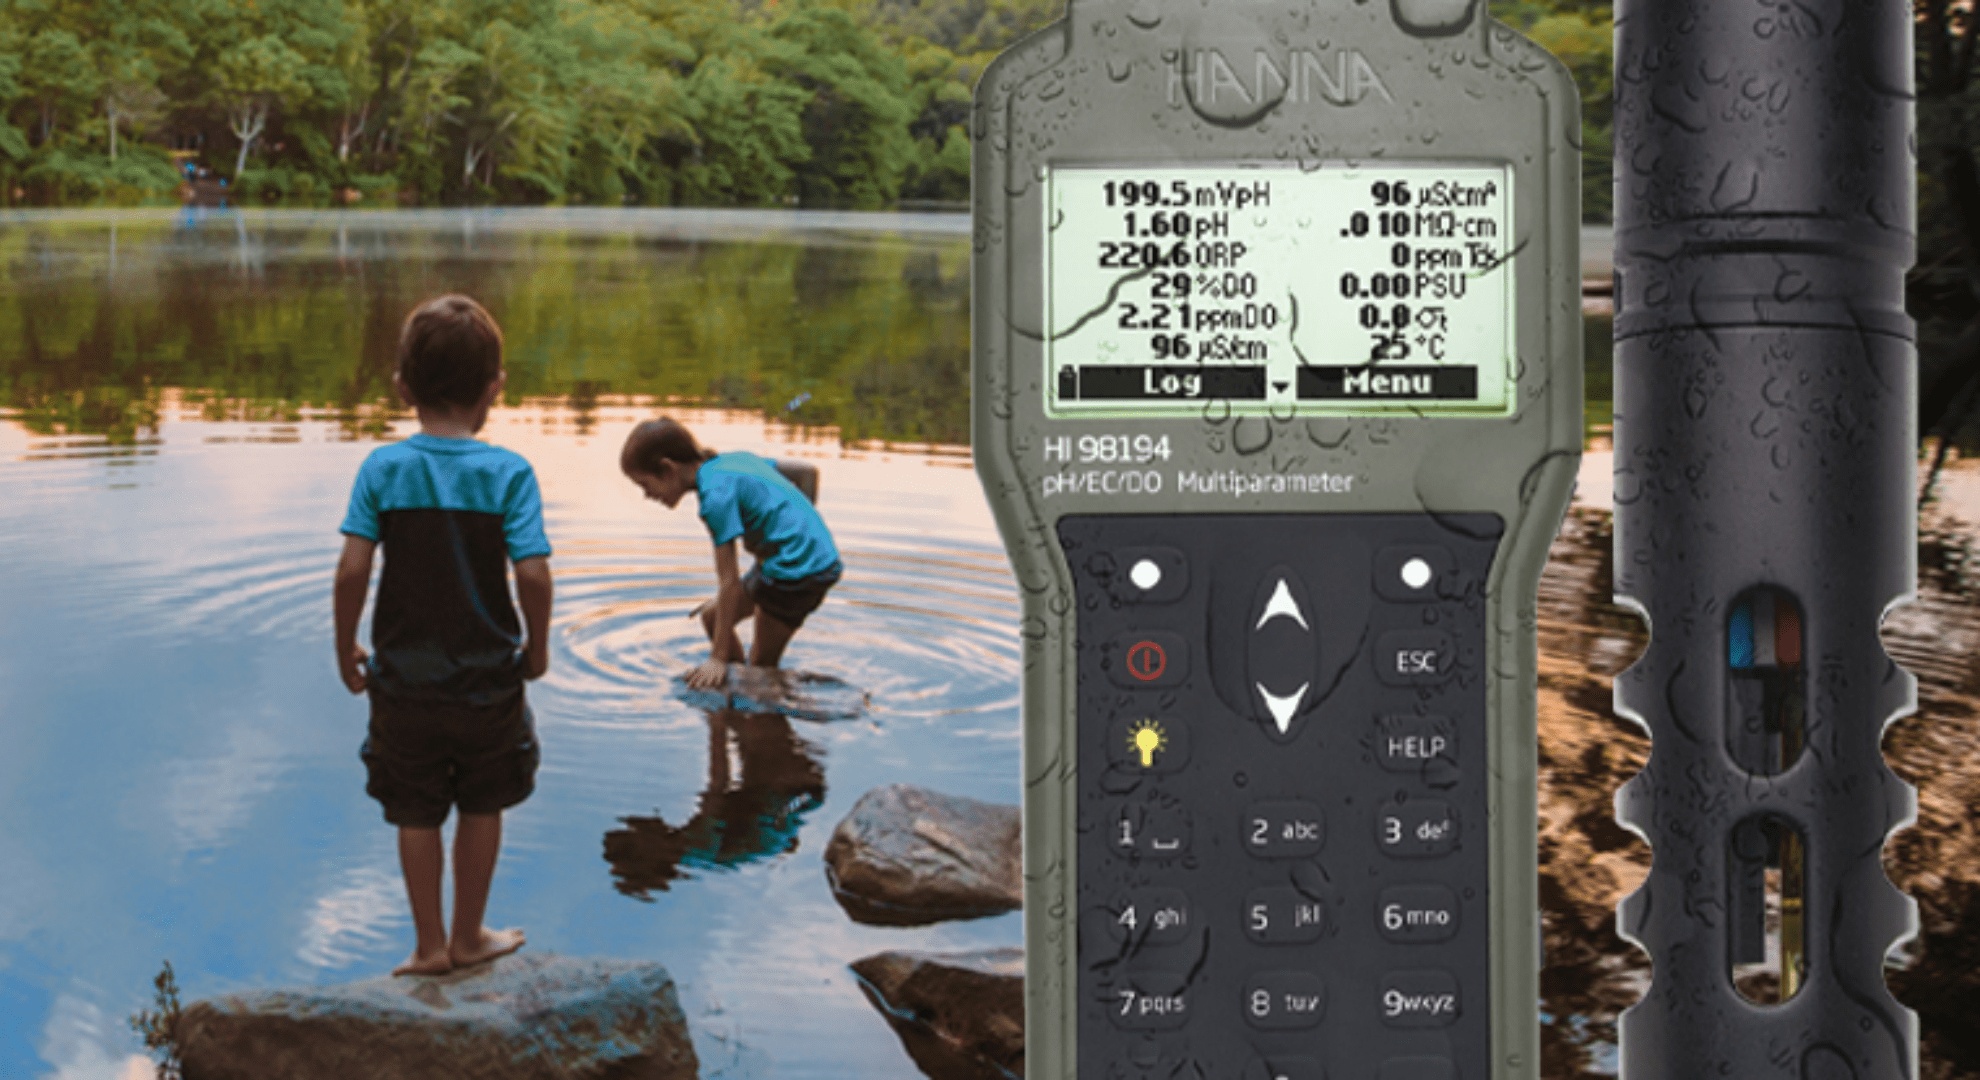 Benefits of Portable Multiparameter Devices for Water Quality Testing and Their Environmental Impact